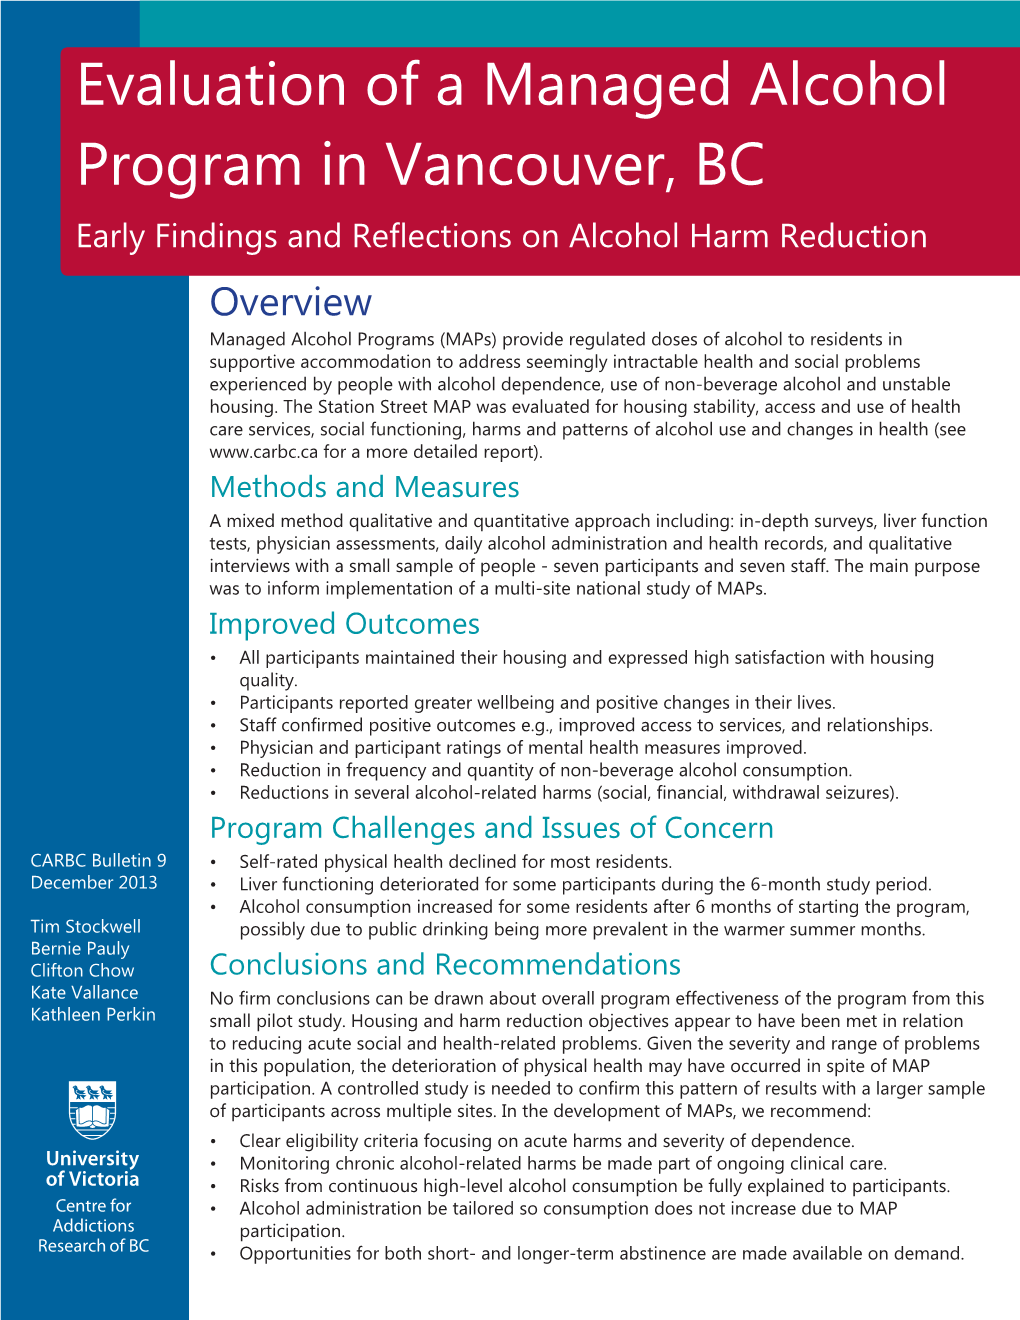 Evaluation of a Managed Alcohol Program in Vancouver, BC